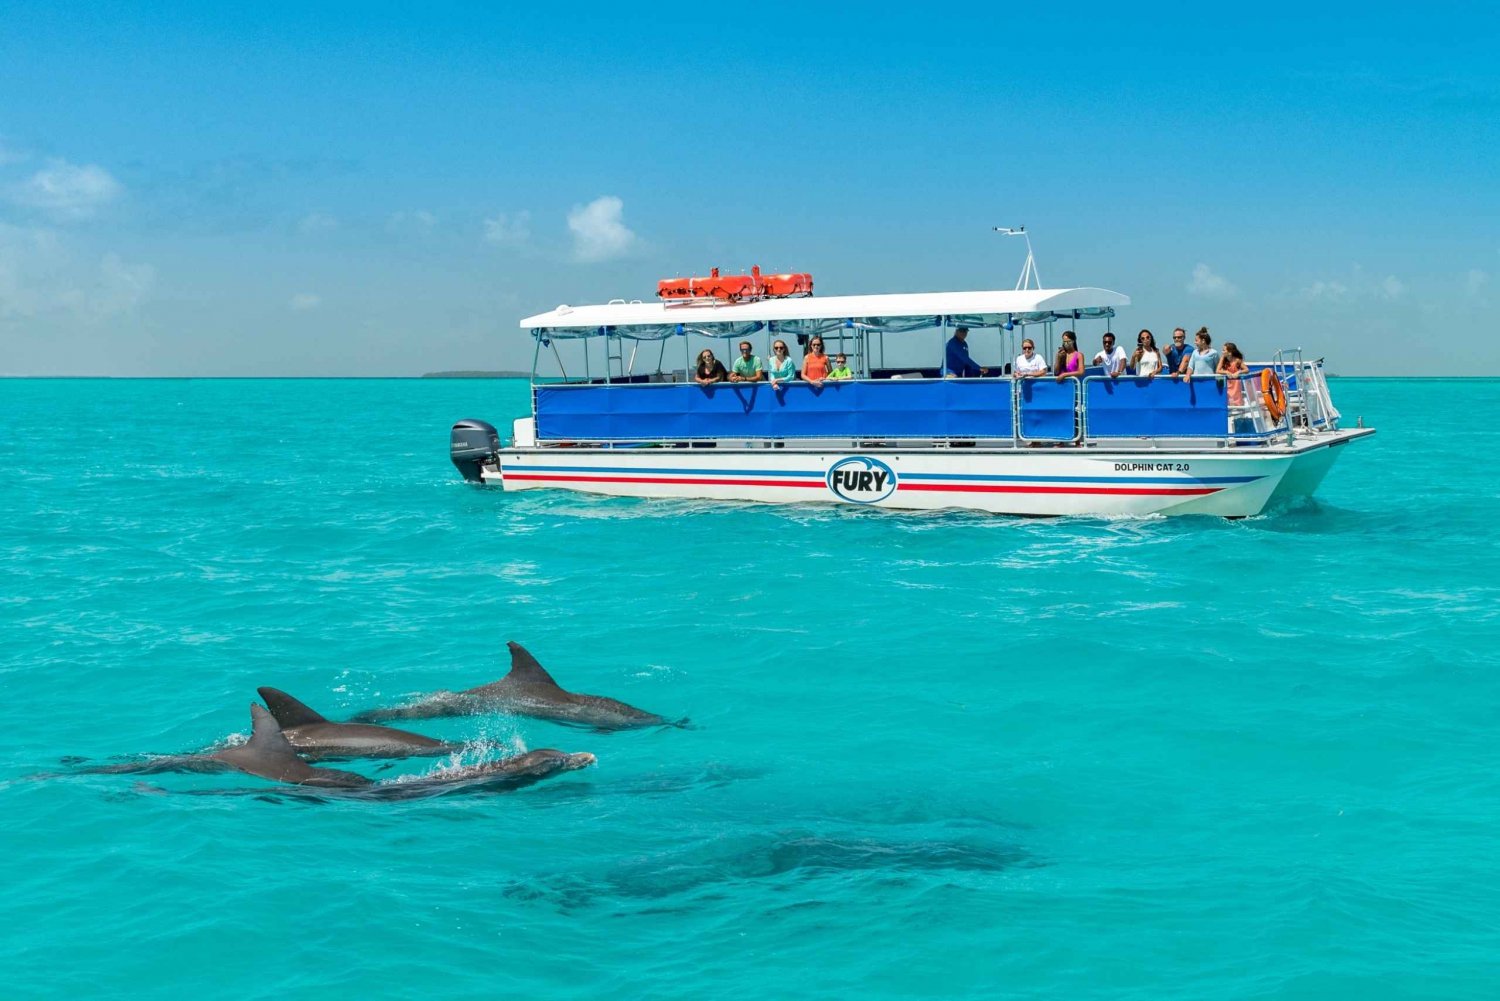 From Miami: Key West Tour with Choice of Water Activities